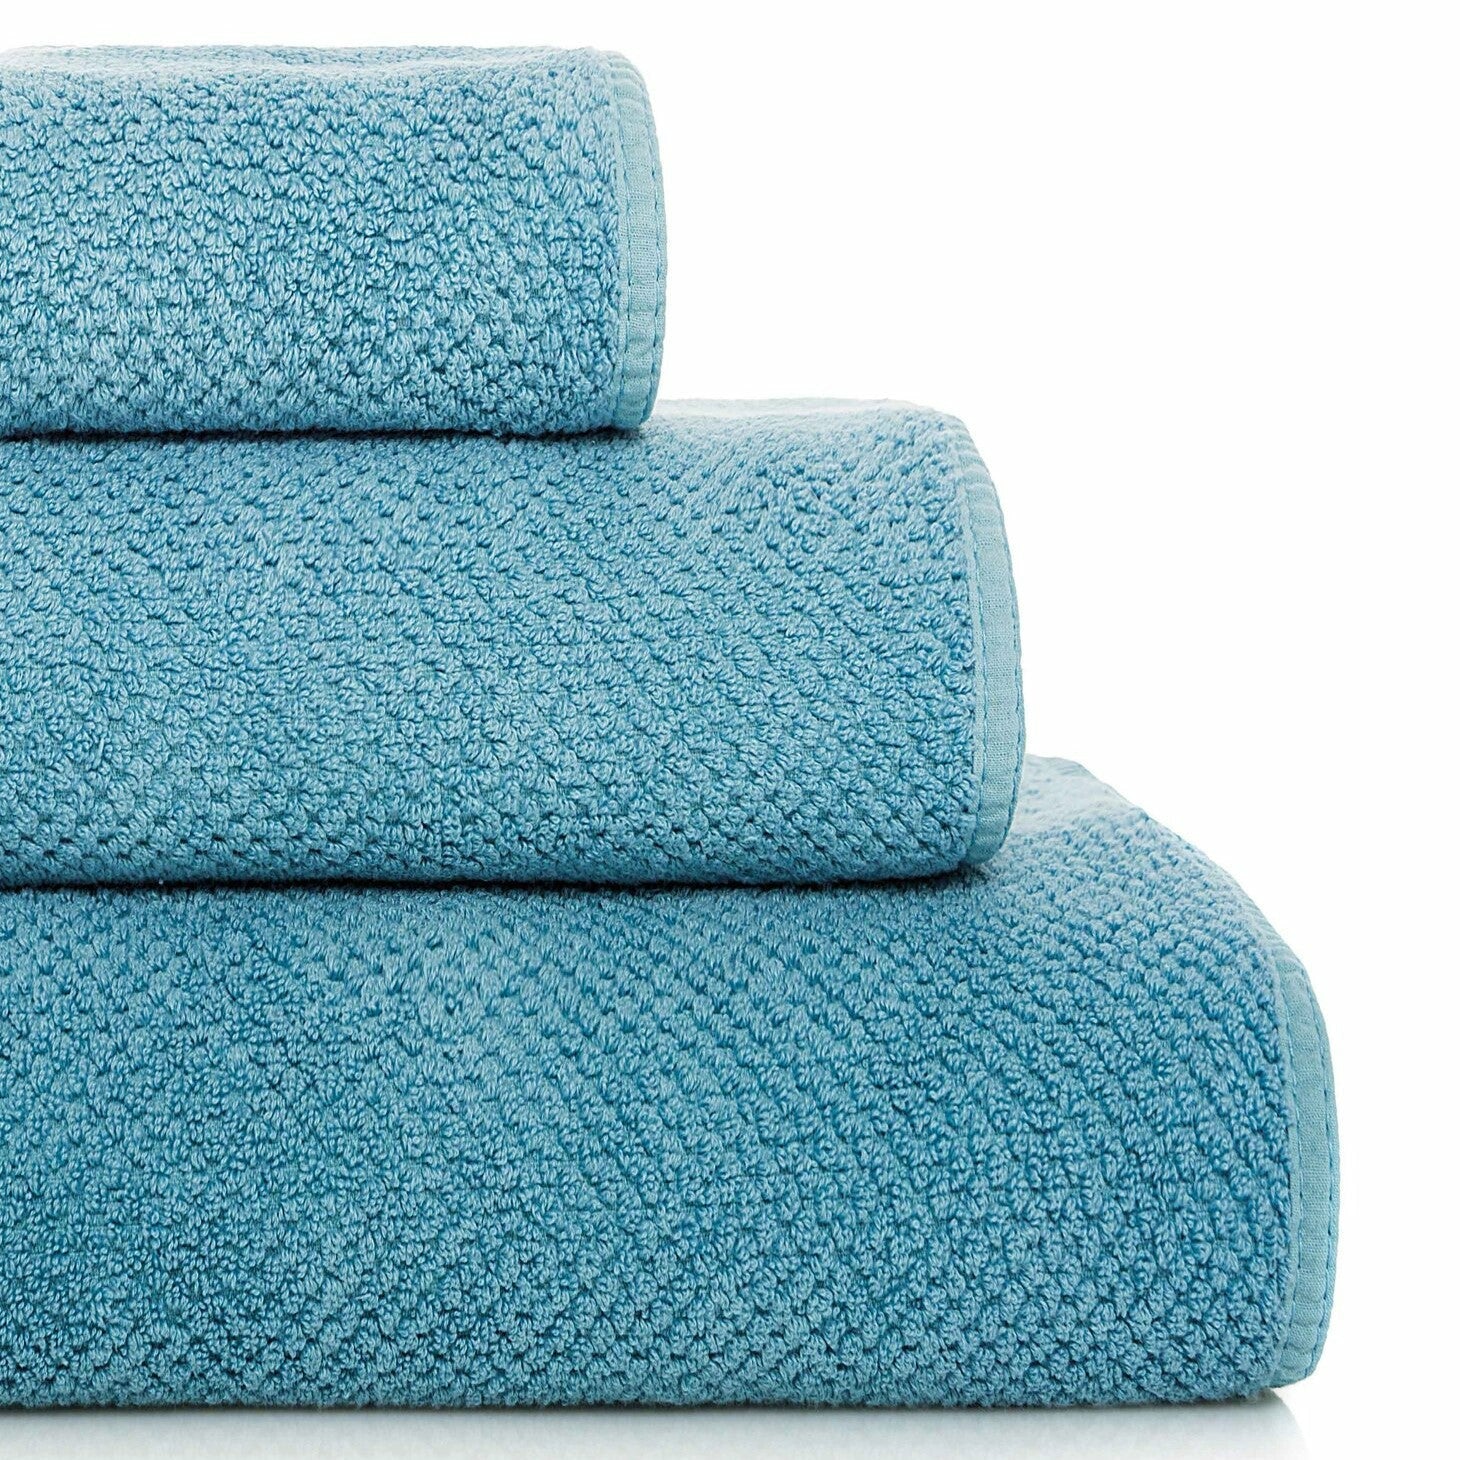 Milagro Towels, Soft plush terry, extra luxurious and absorbent, Woven of  zero twist yarns, worlds softest towel